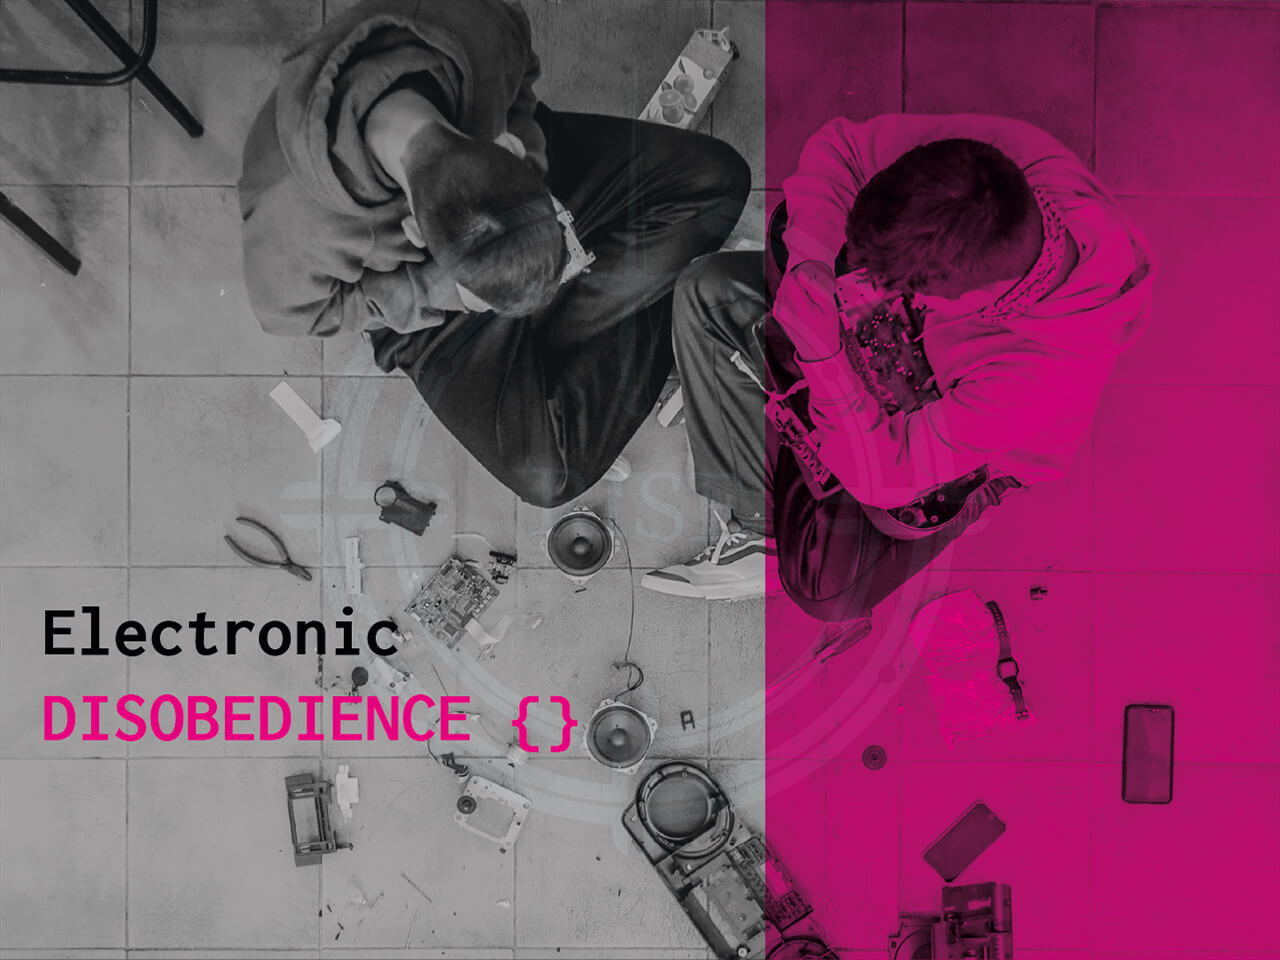 Electronic disobedience